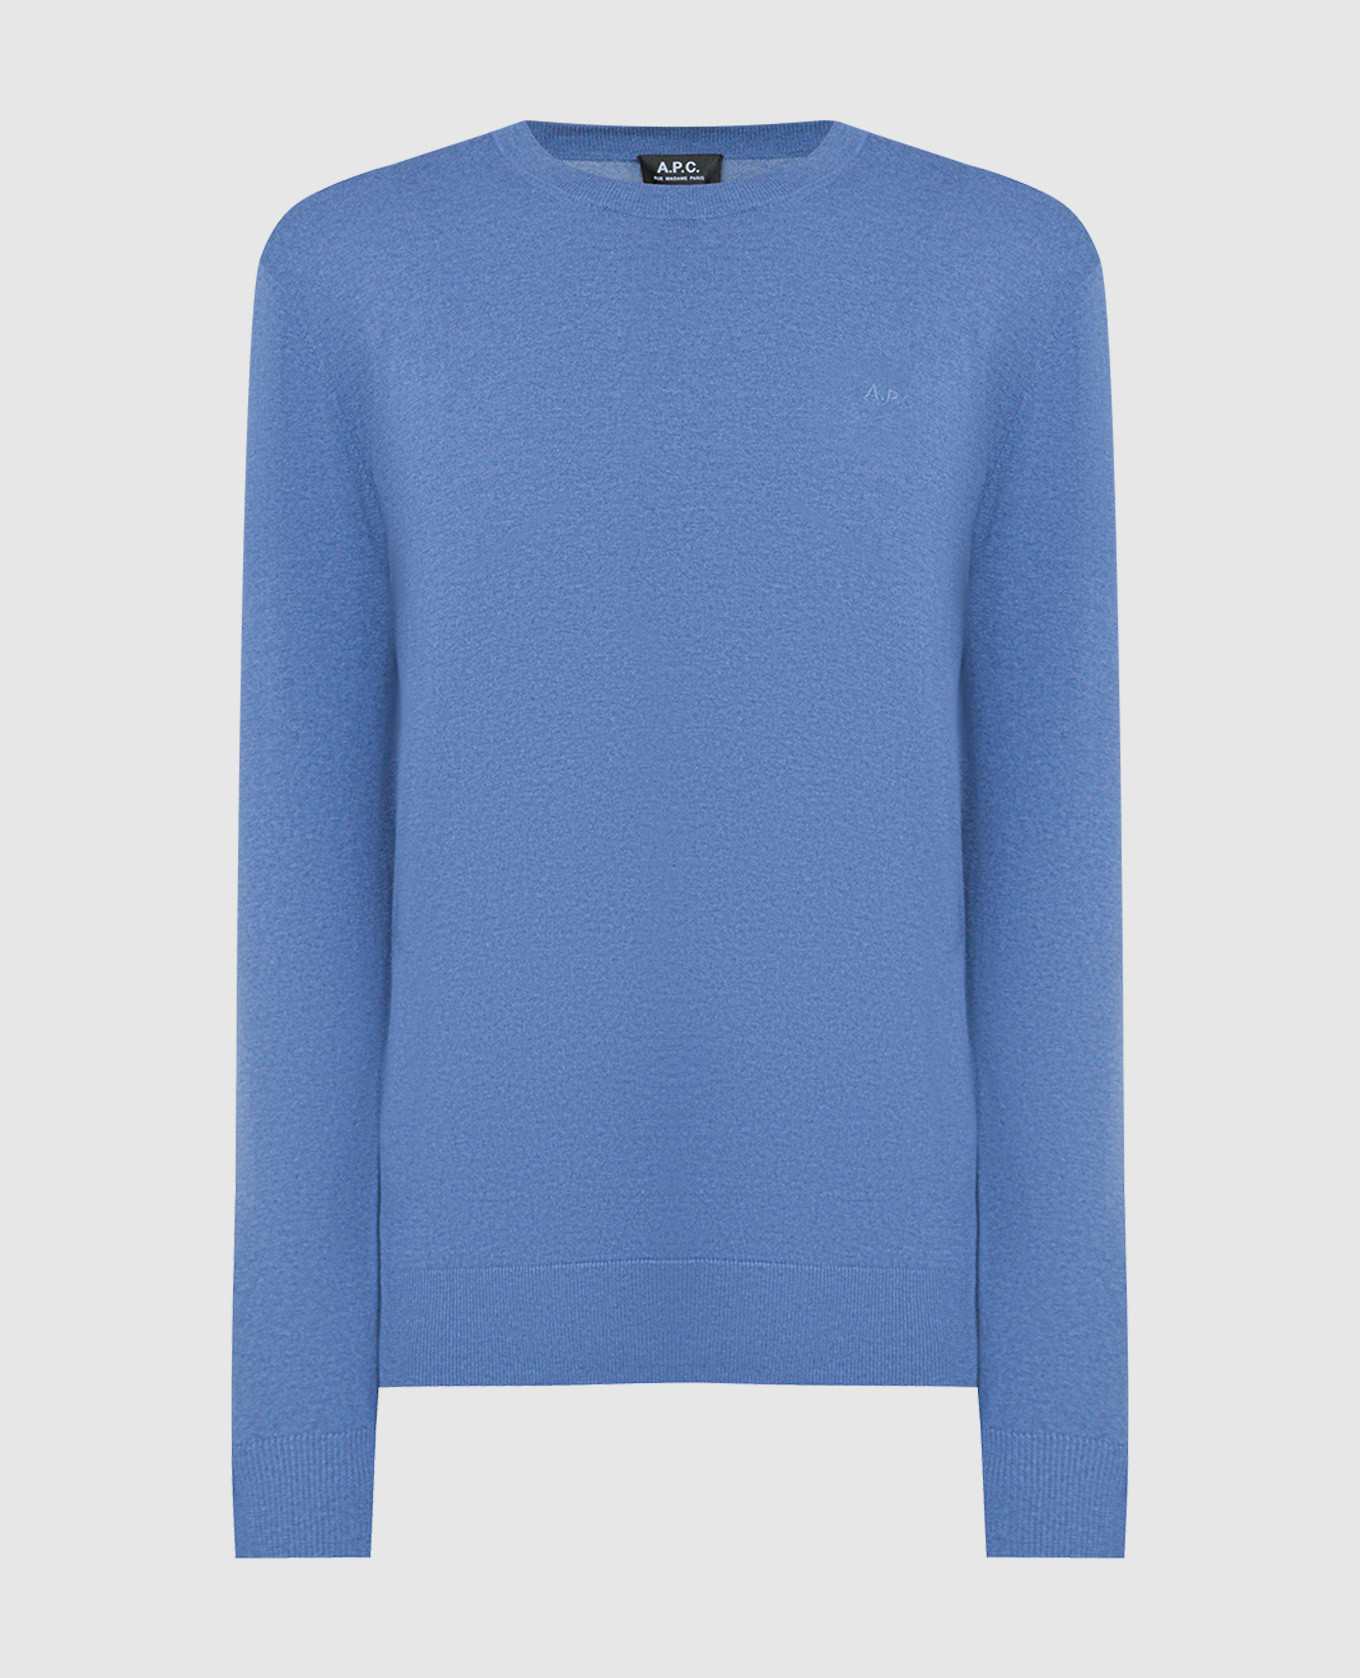 Blue Juio cashmere jumper with logo embroidery